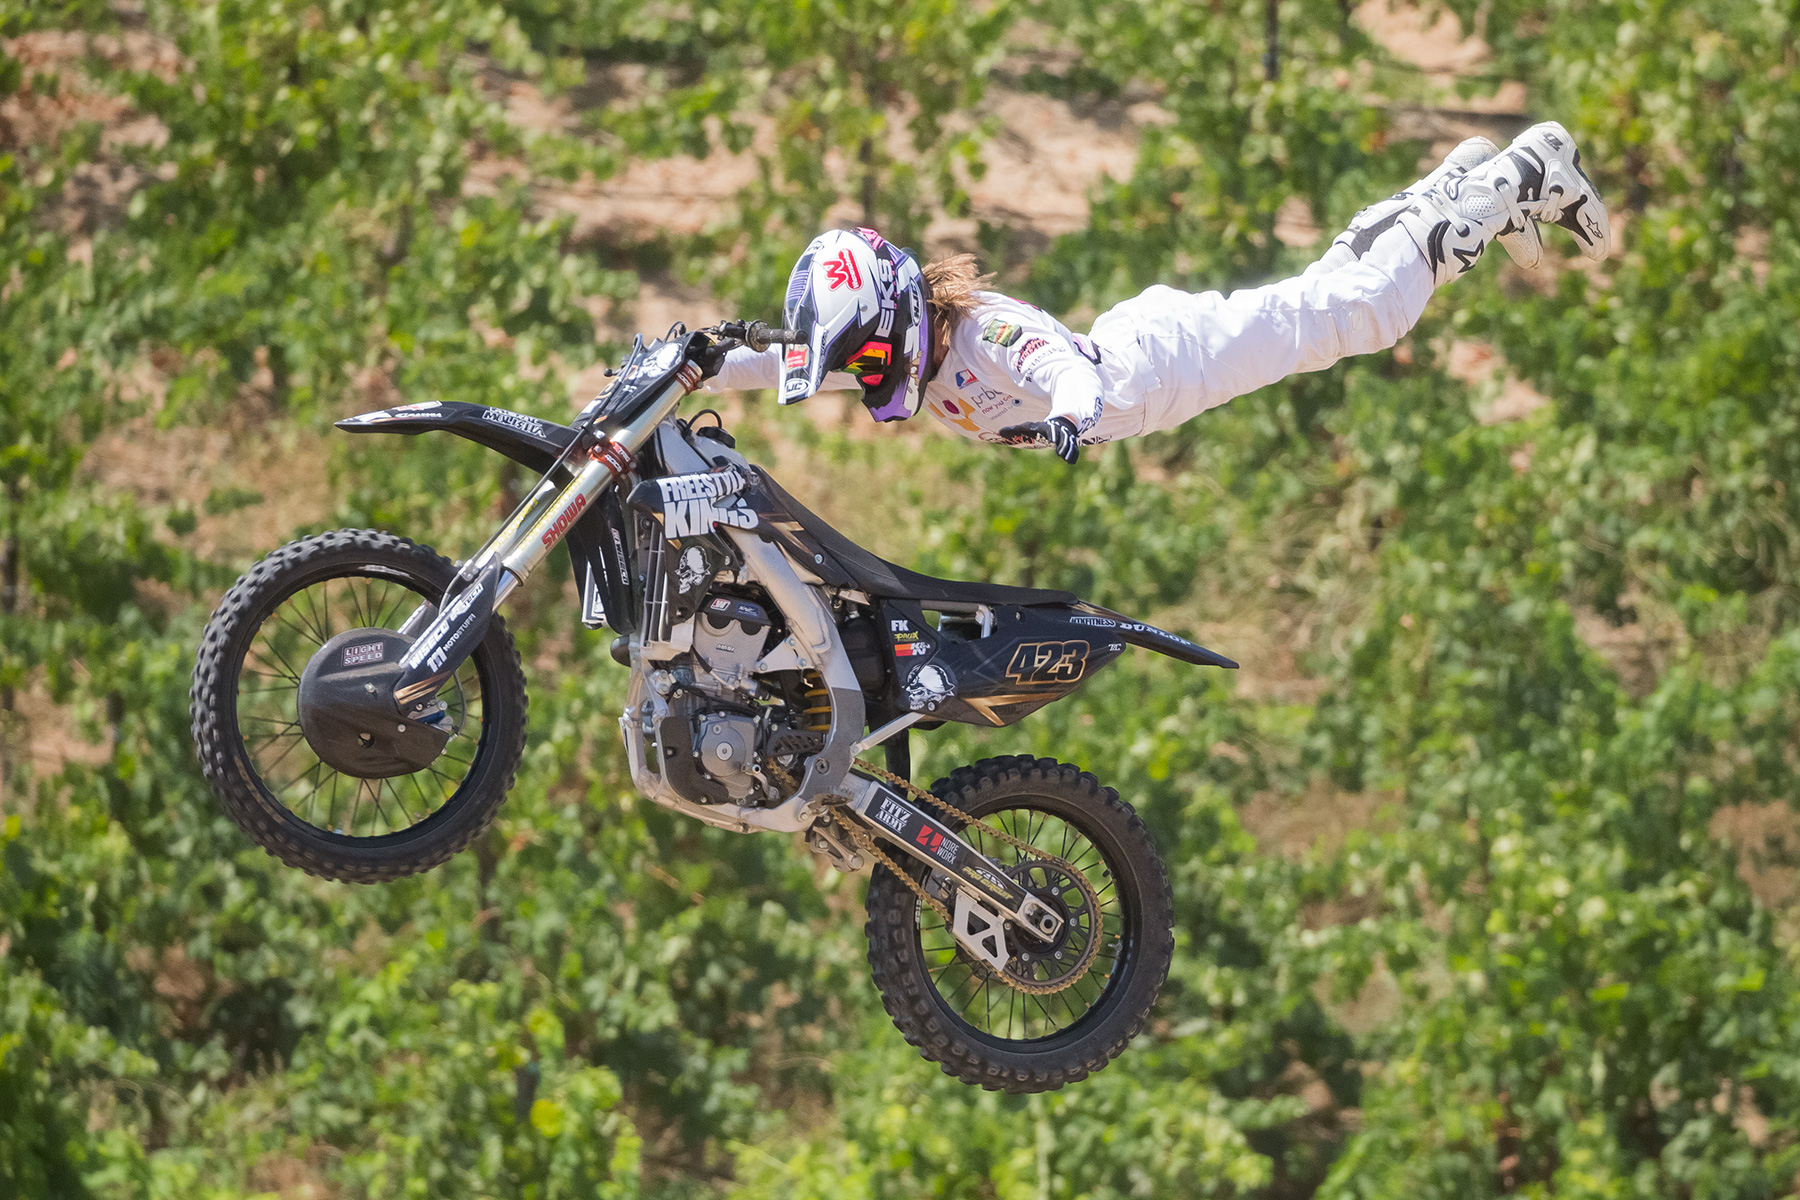 Catching Up with Vicki Golden: The Transition from Supercross to FMX